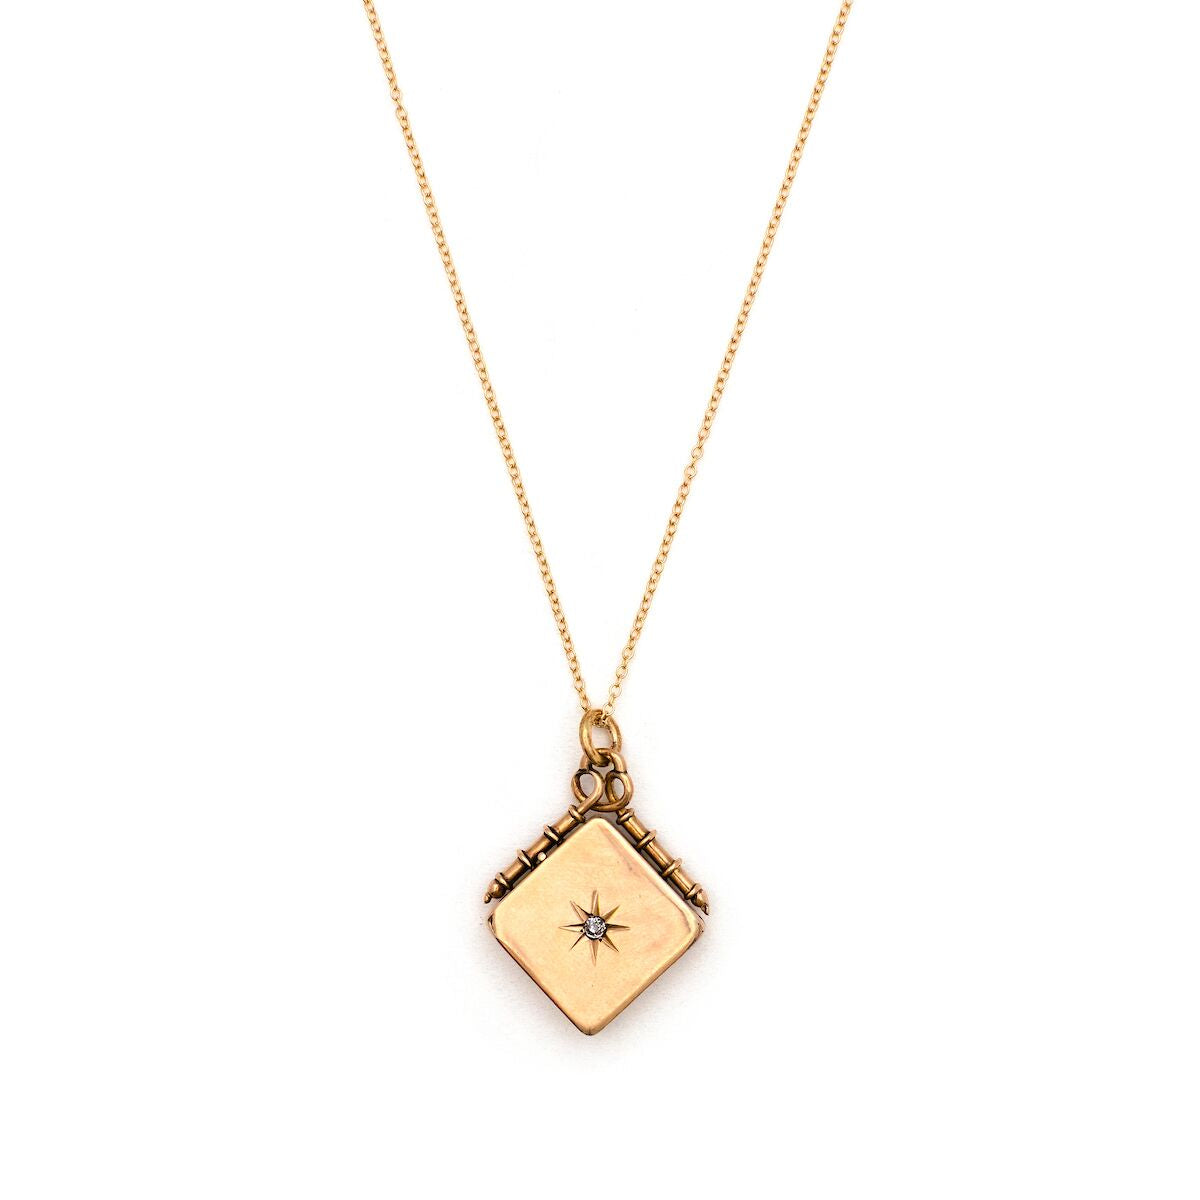 14K Gold & Diamond Star Antique Locket, square gold Victorian locket for holding pictures and photos, front view